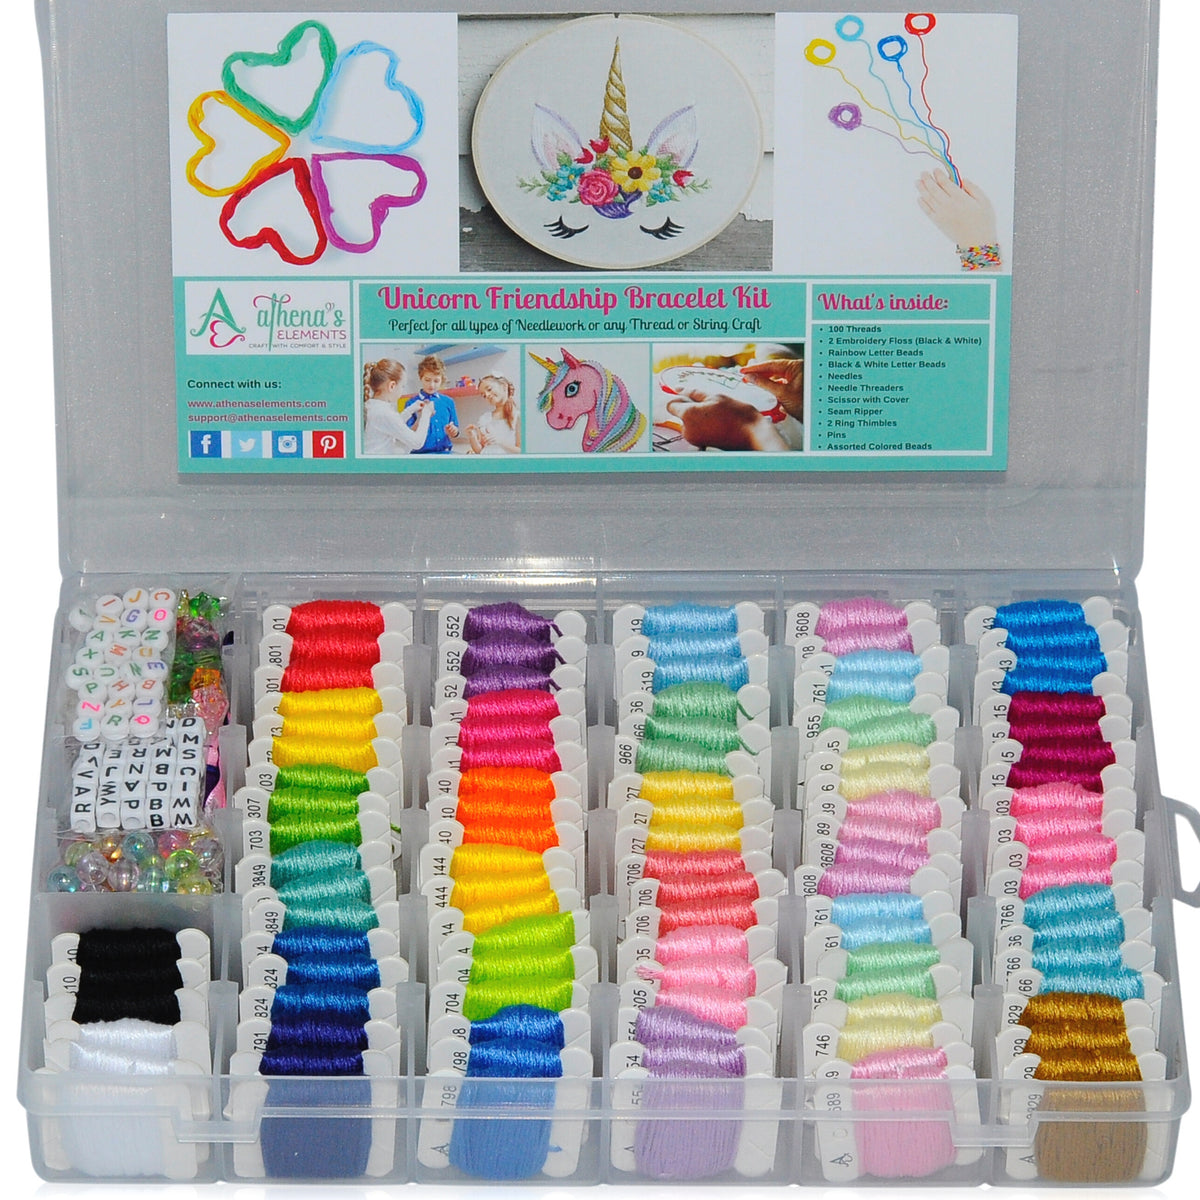 Athena's Elements Embroidery Floss Friendship Bracelet String Kit - 276pcs Embroidery  Thread and Accessories - Colors are Labeled